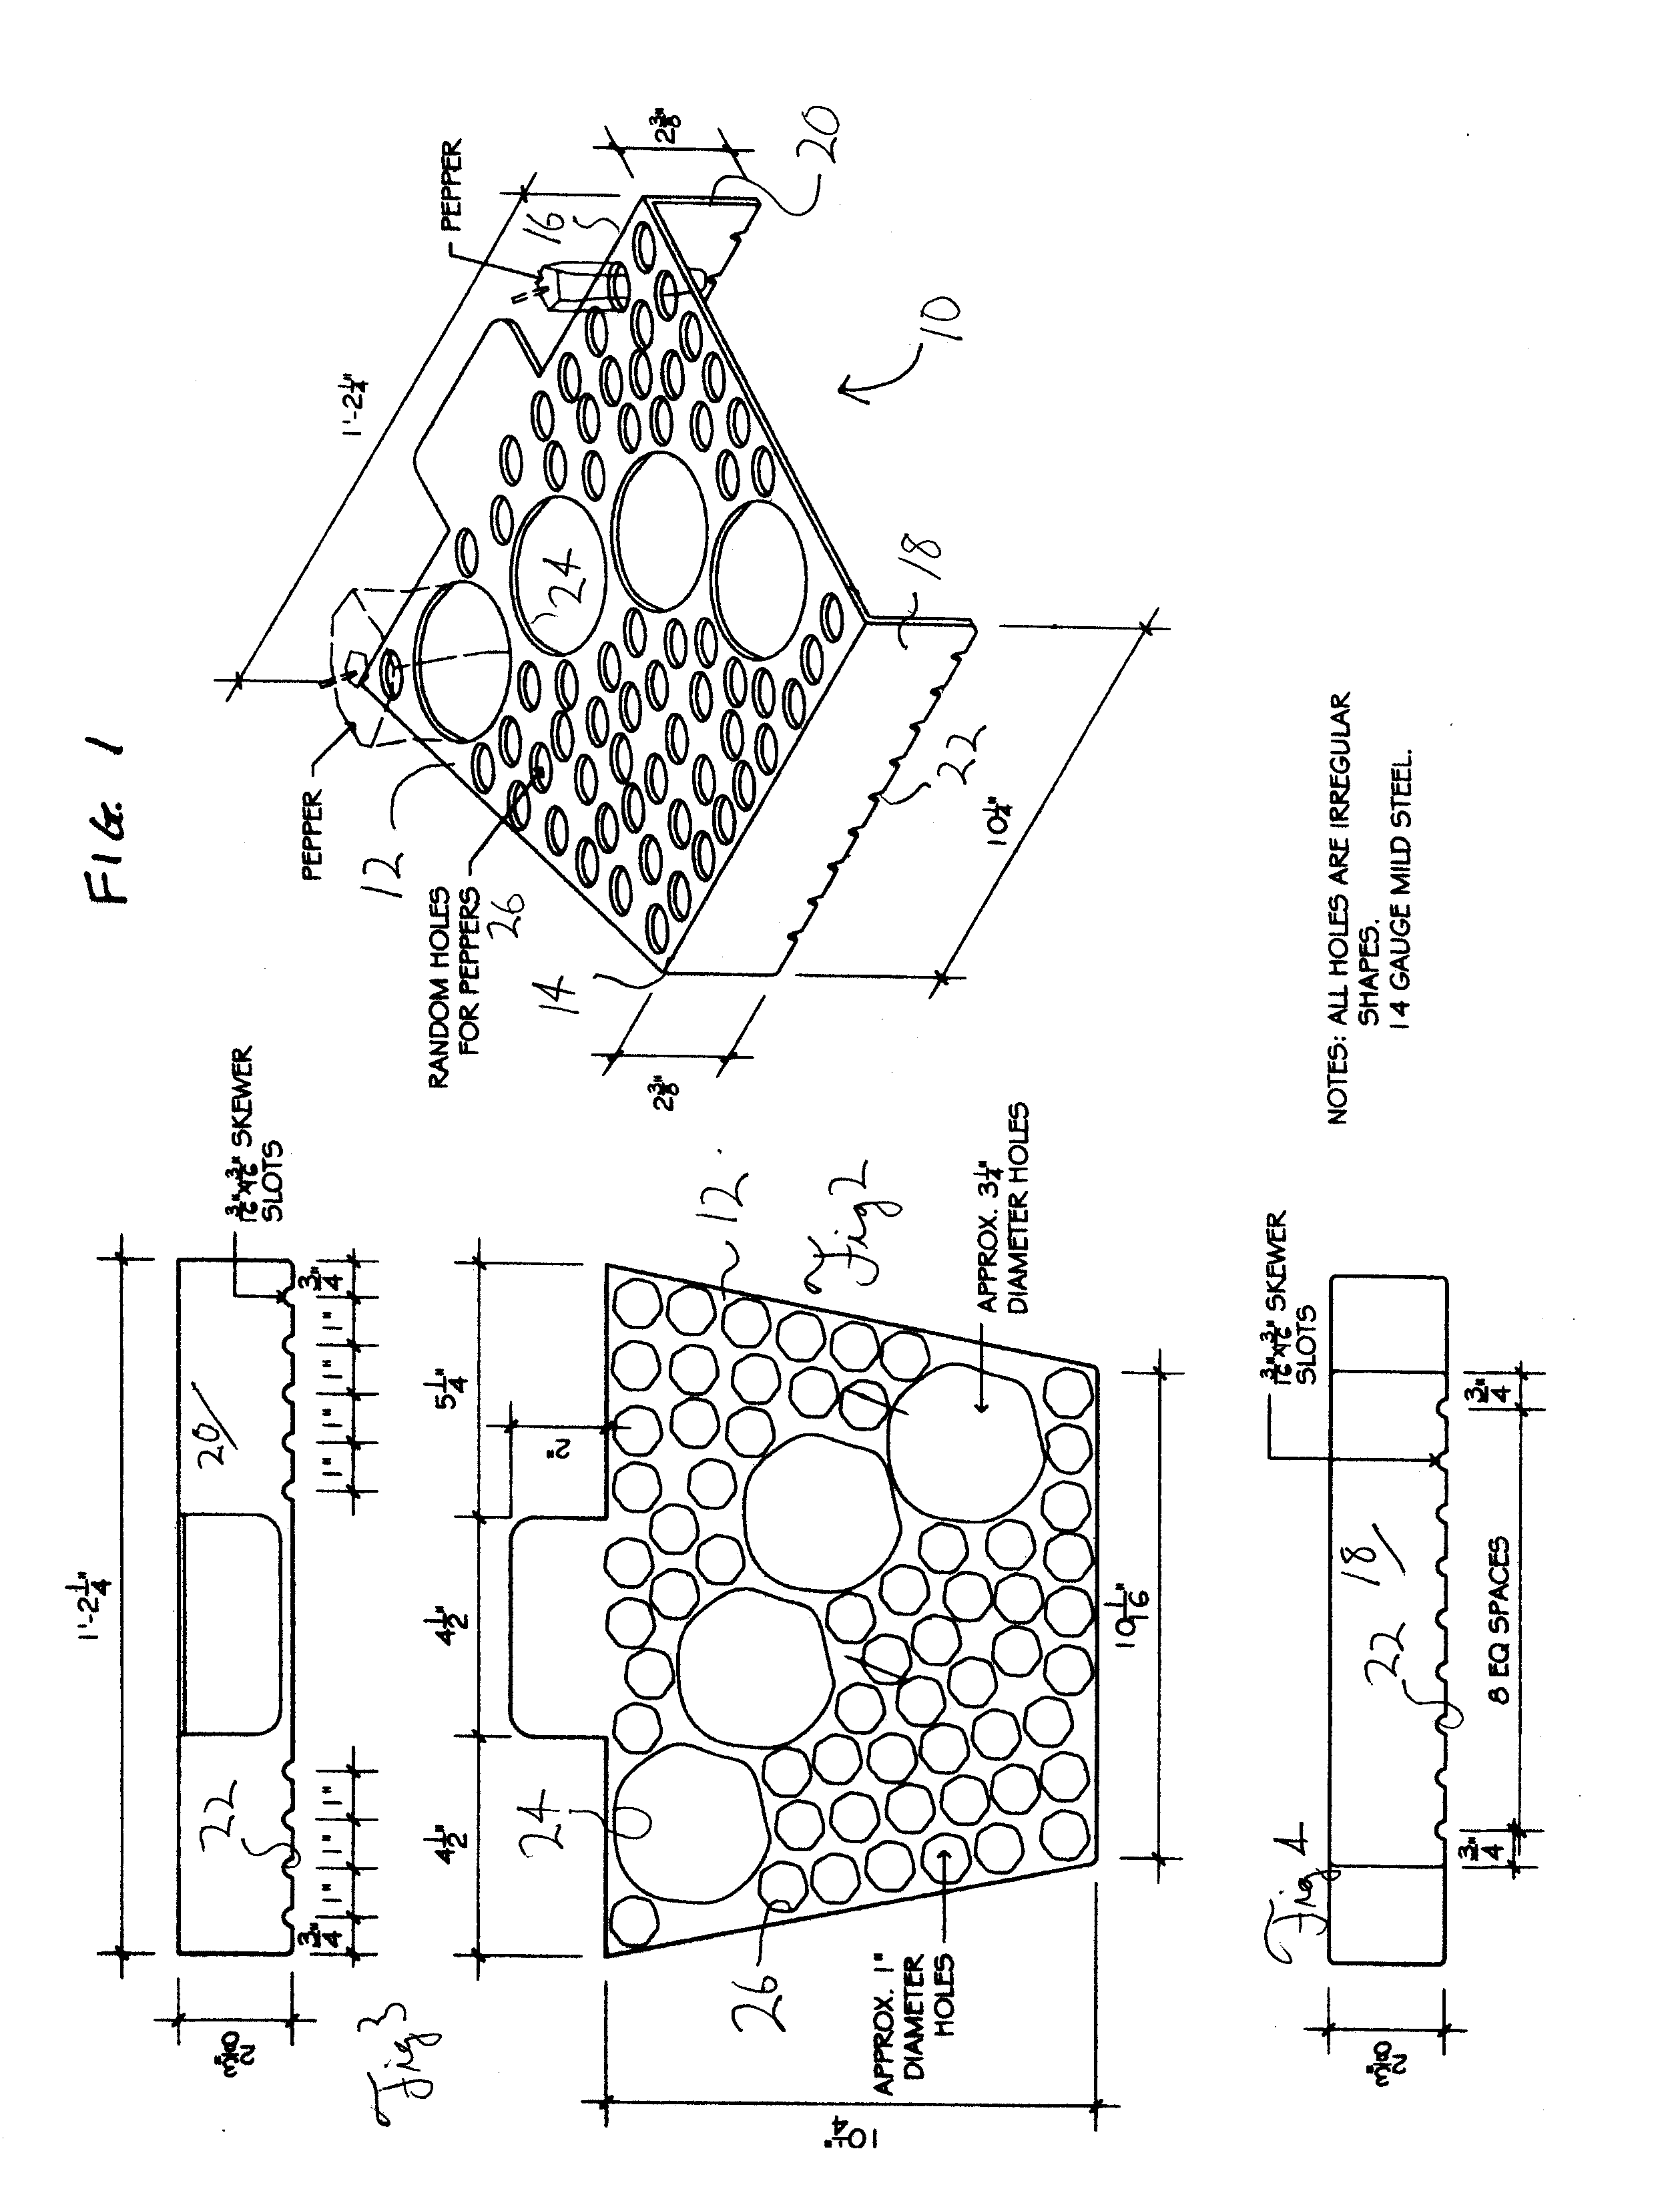 Grill and method for making and using the improved grill